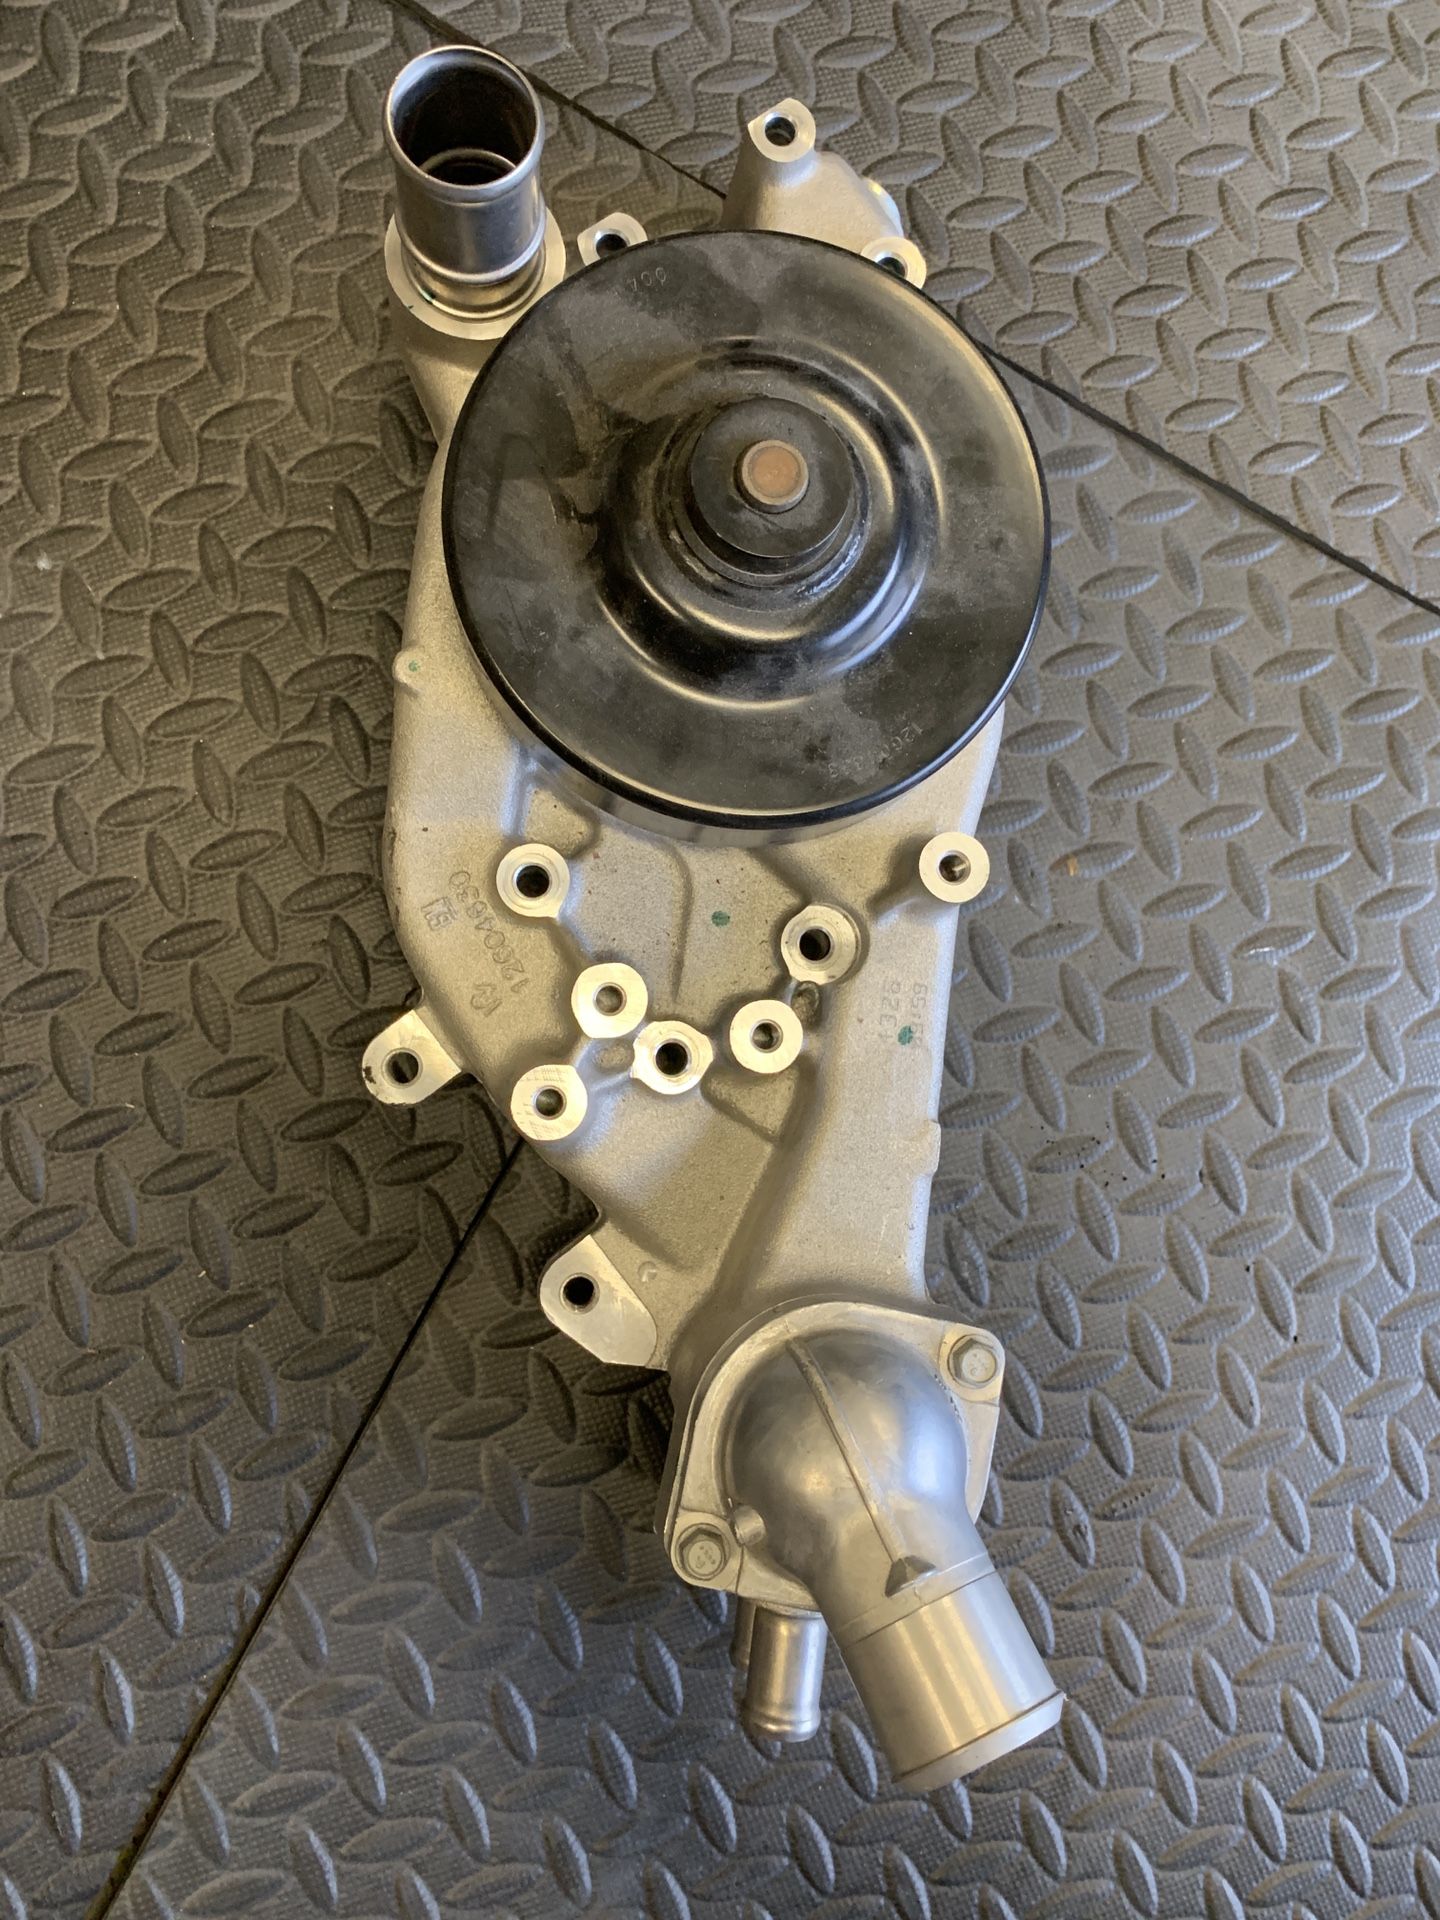 Chevy LS3 water pump - Original GM Part Never Used